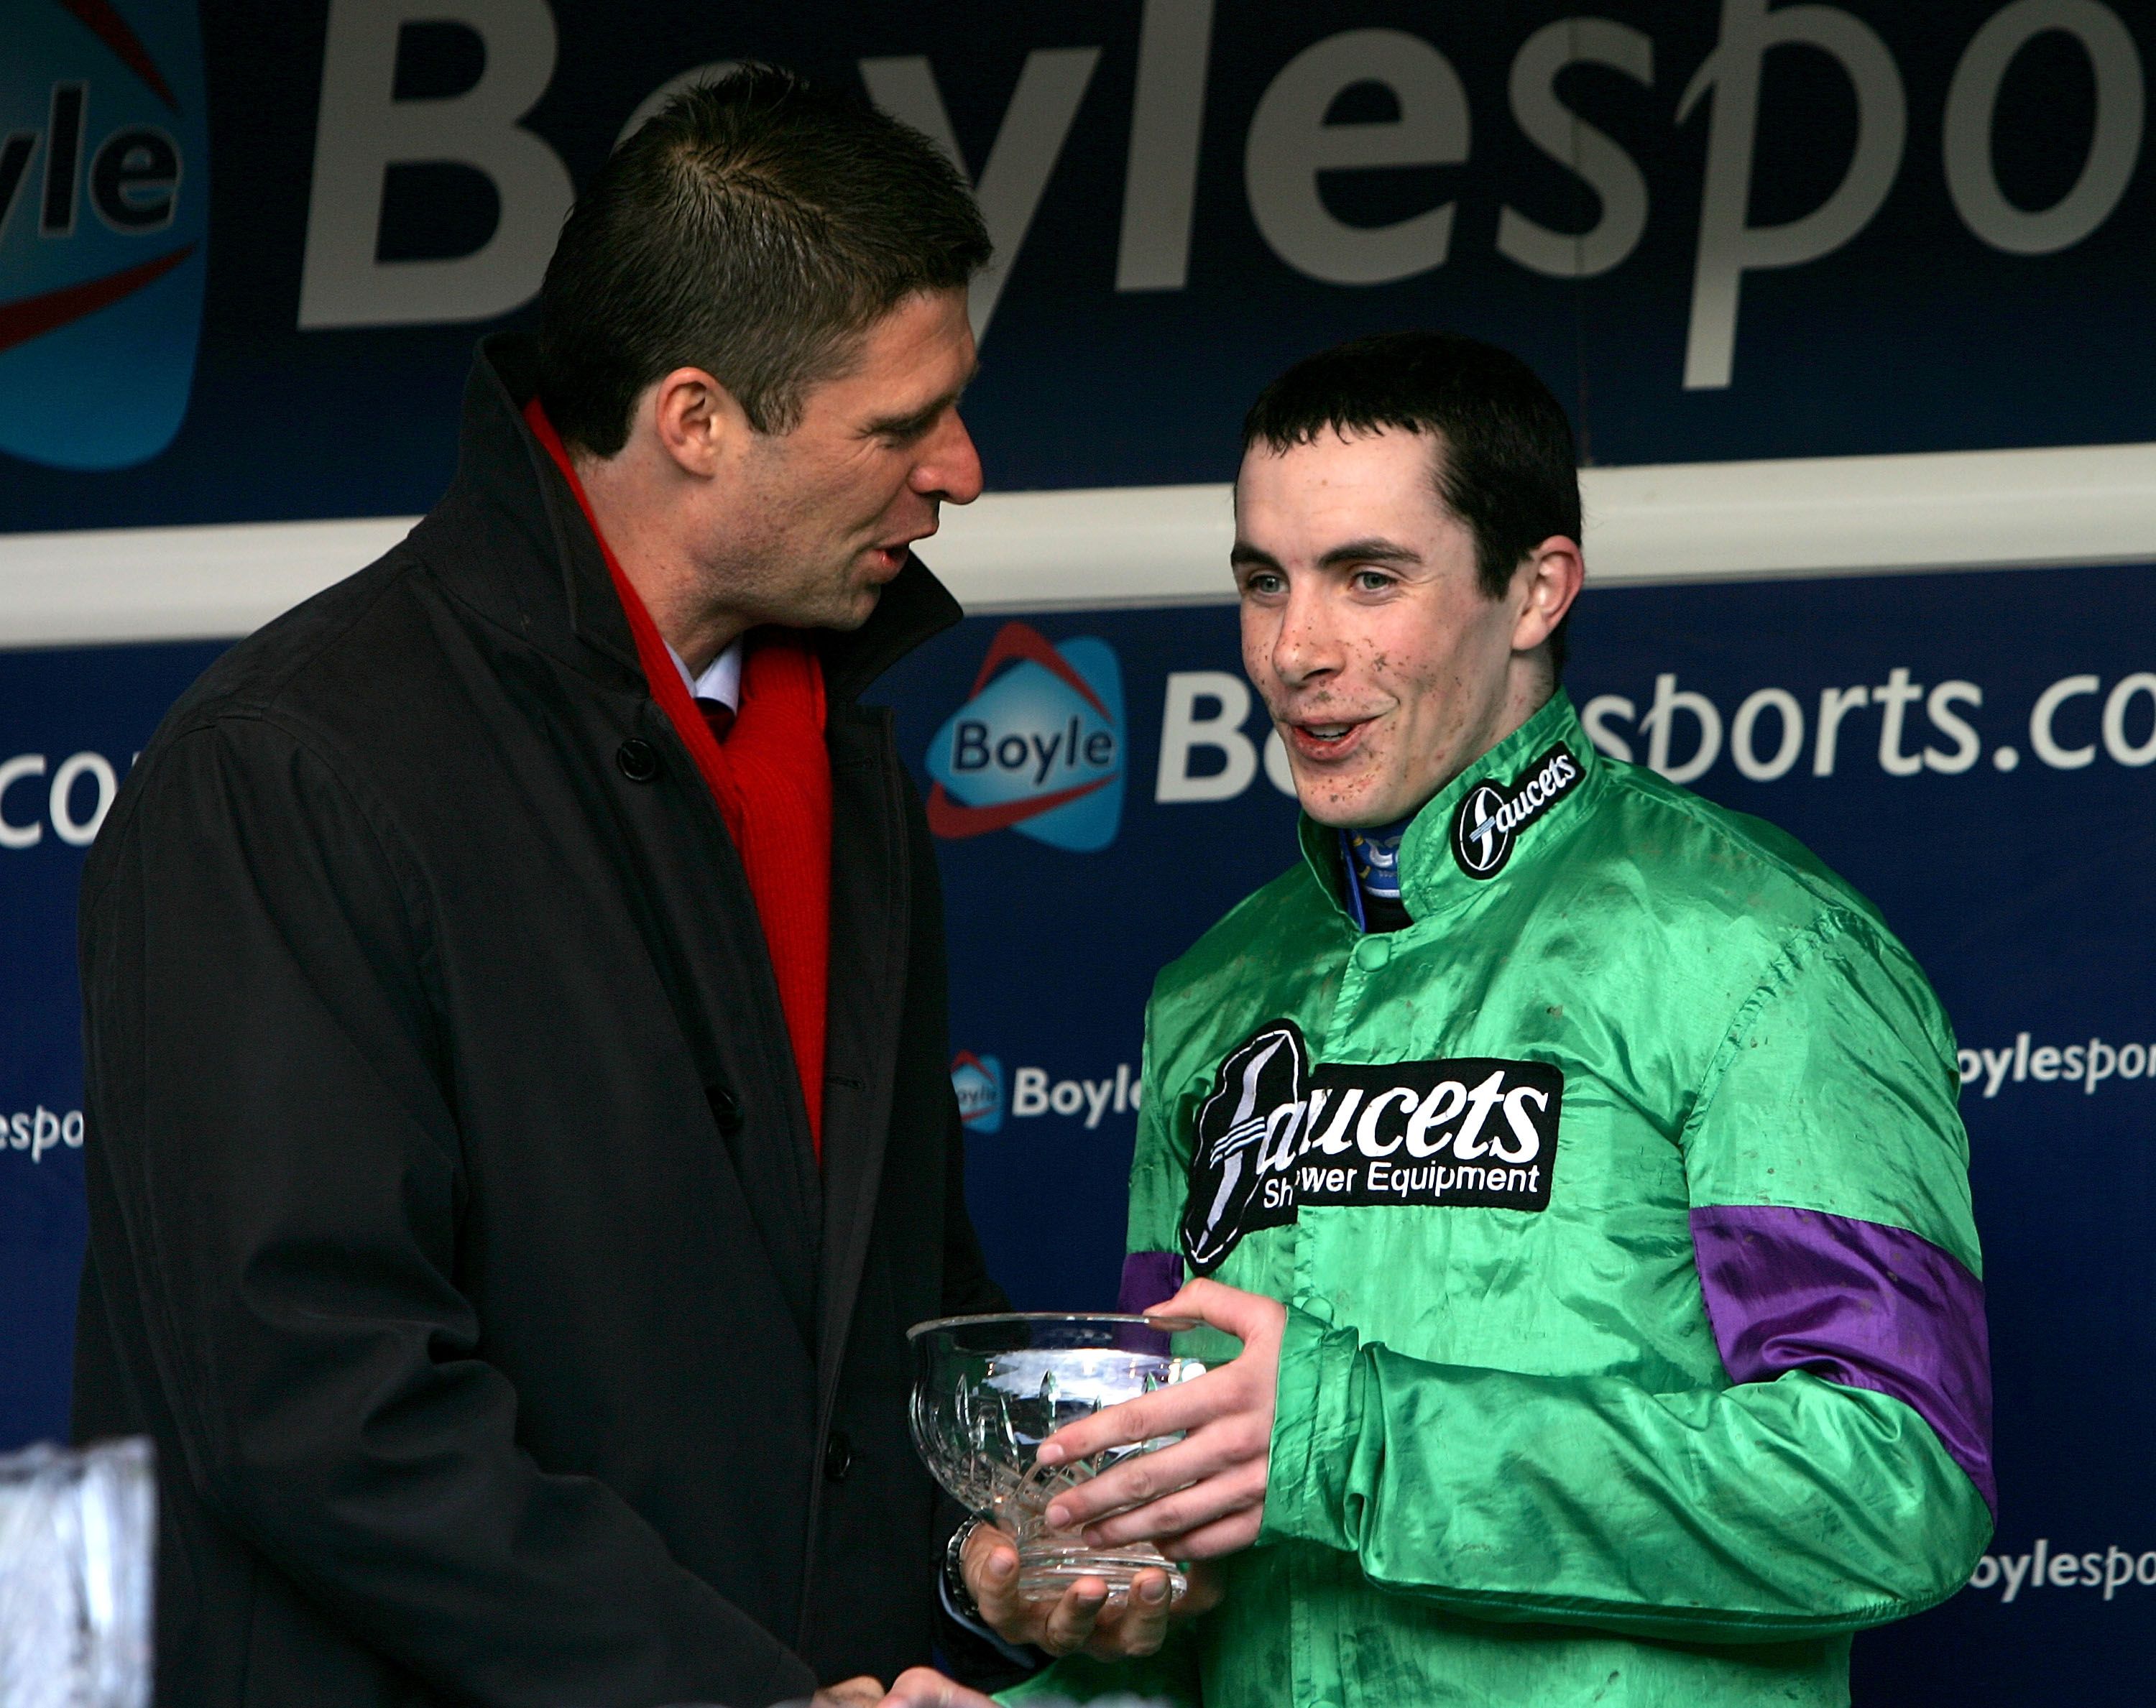 CHELTENHAM, UNITED KINGDOM - DECEMBER 12: Niall Quinn of Sunderland Football Club presents Aidan Coleman with his trophy after he wins The Boylepoker.com Steeple Chase at Cheltenham Racecourse on December 12, 2008 in Cheltenham, England. (Photo by Christopher Lee/Getty Images)